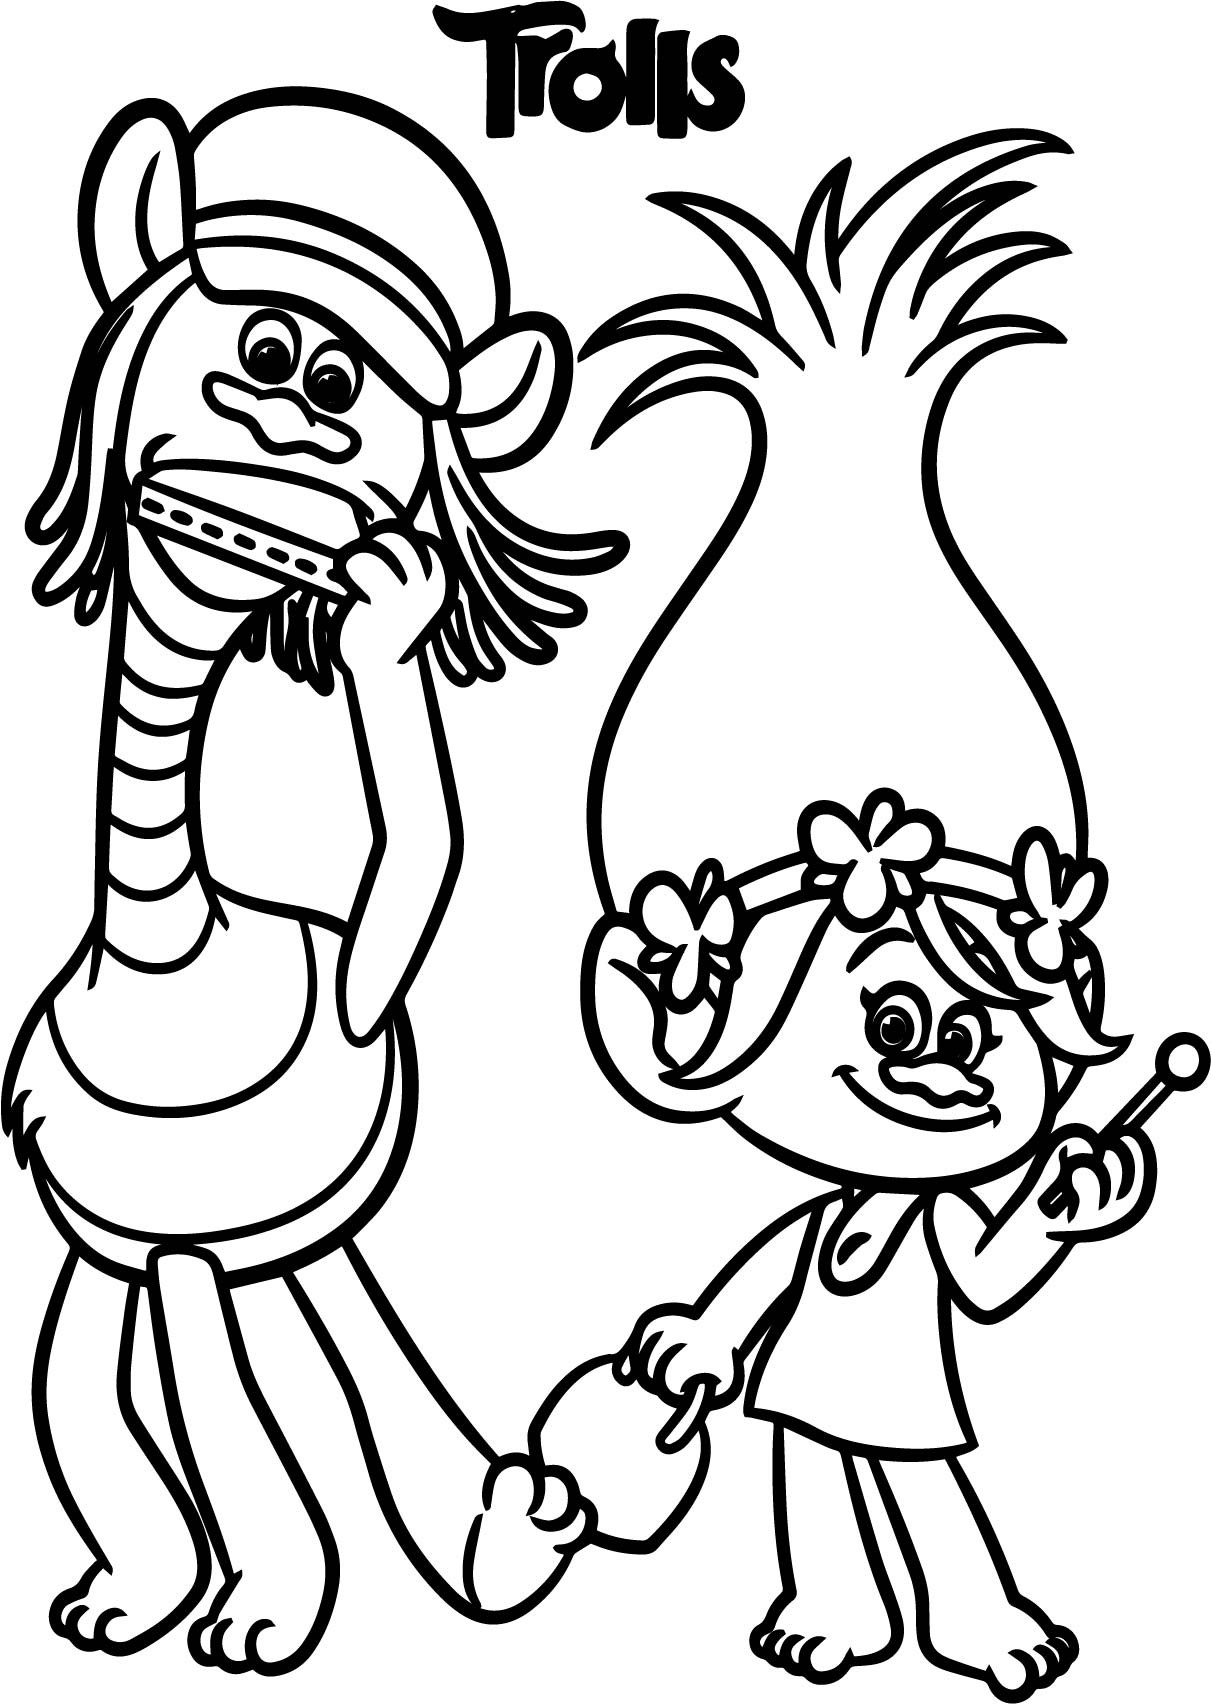 Free Coloring Sheets For Kids Trolls
 Trolls coloring pages